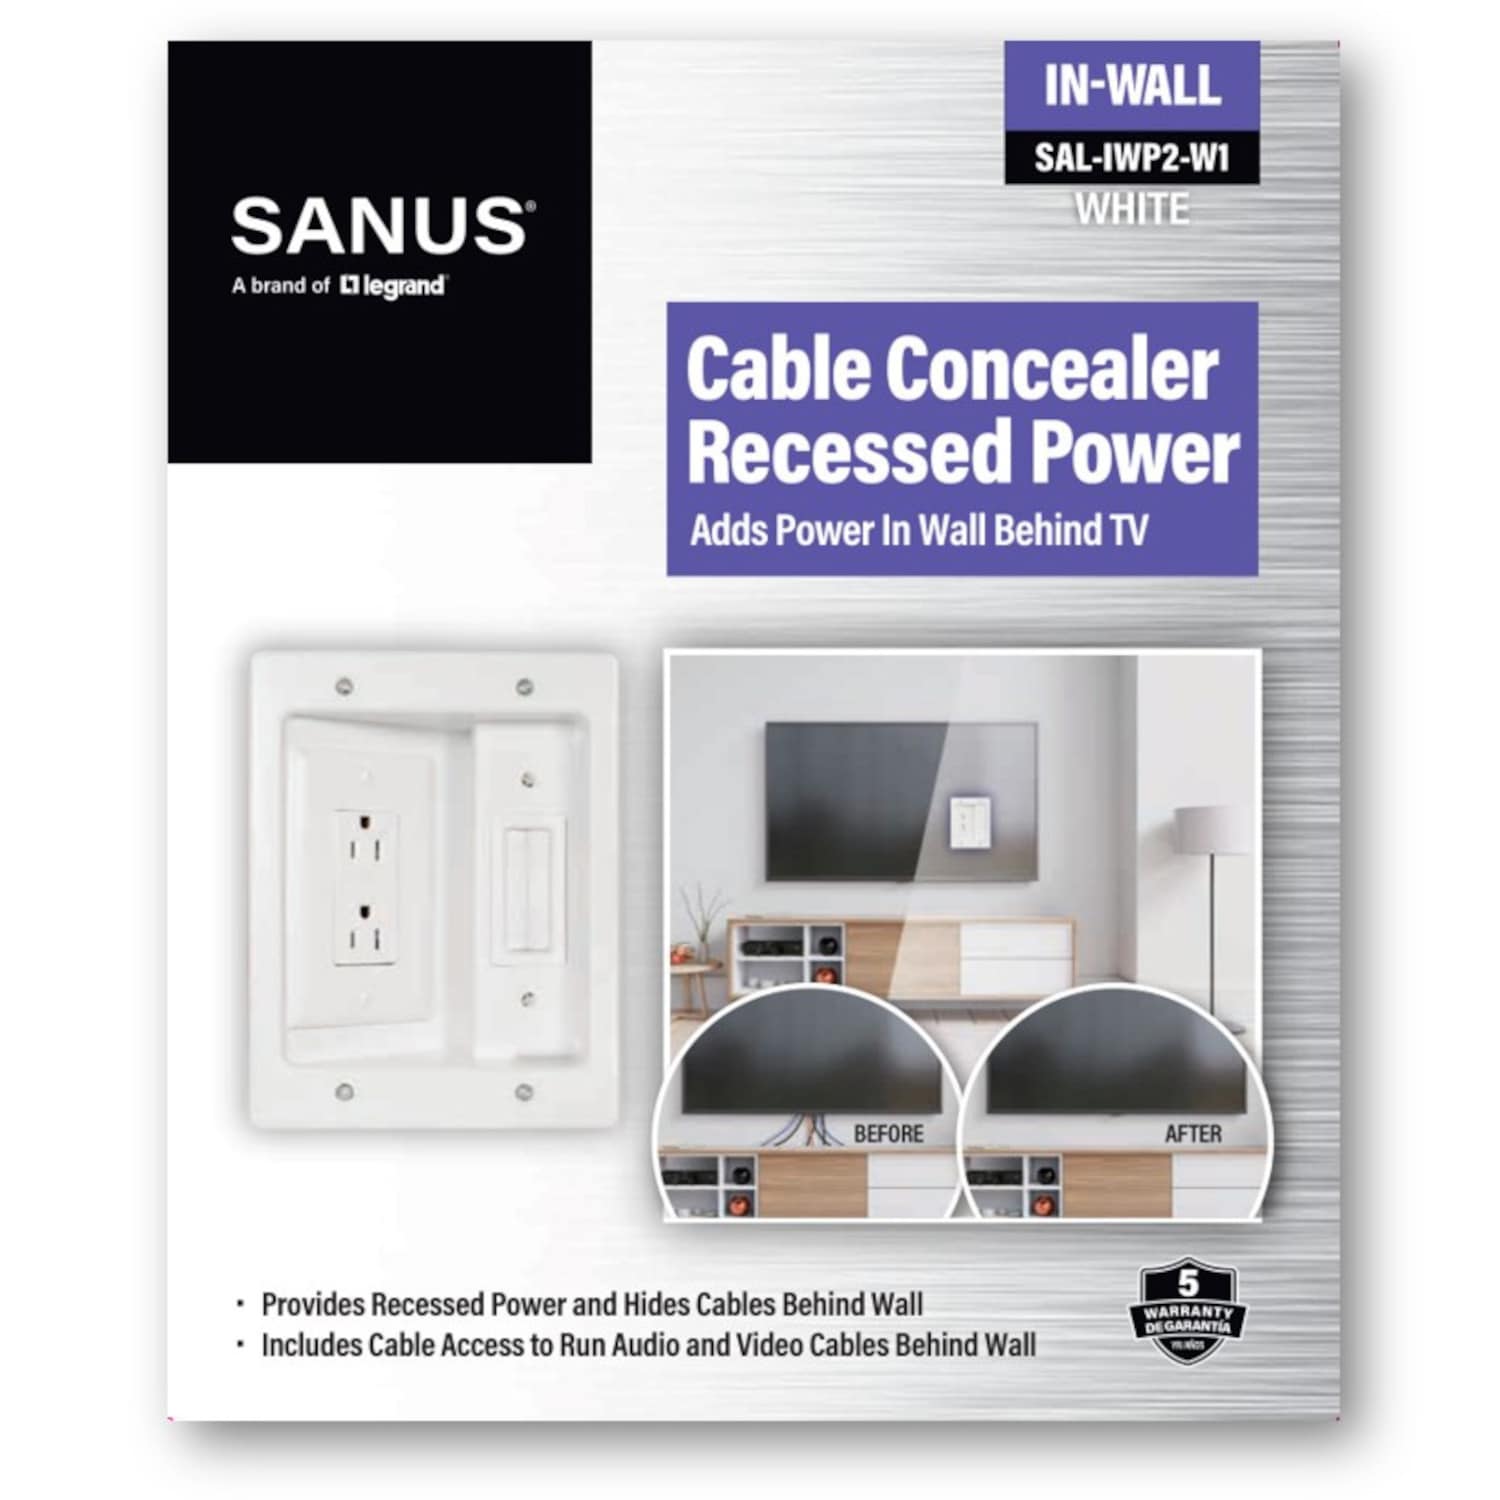 Sanus In-Wall TV Power and Cable Management Kit (White) SA-IWP1-W1